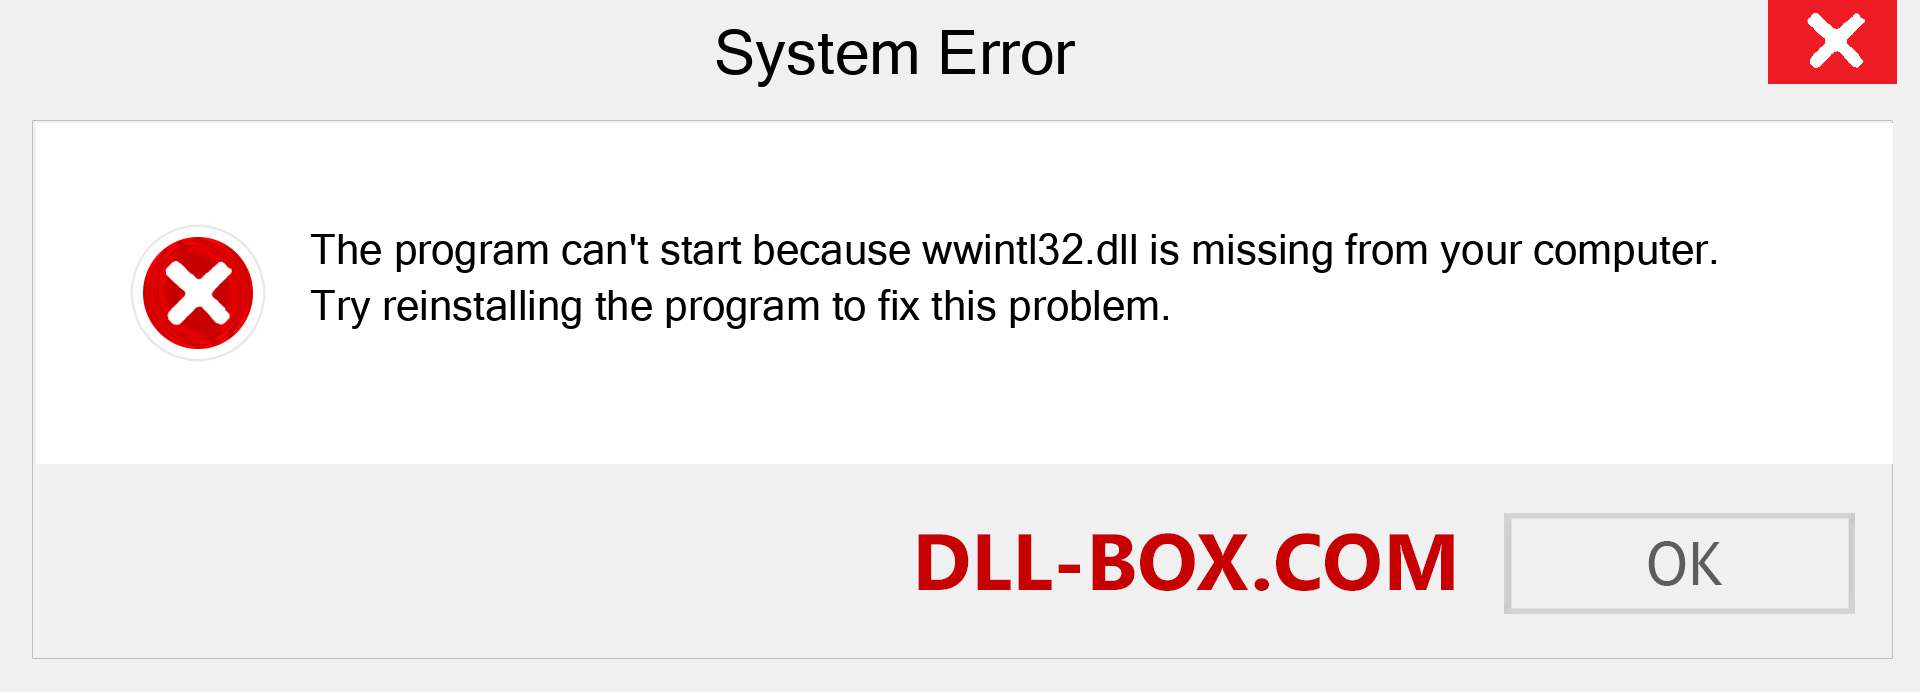  wwintl32.dll file is missing?. Download for Windows 7, 8, 10 - Fix  wwintl32 dll Missing Error on Windows, photos, images